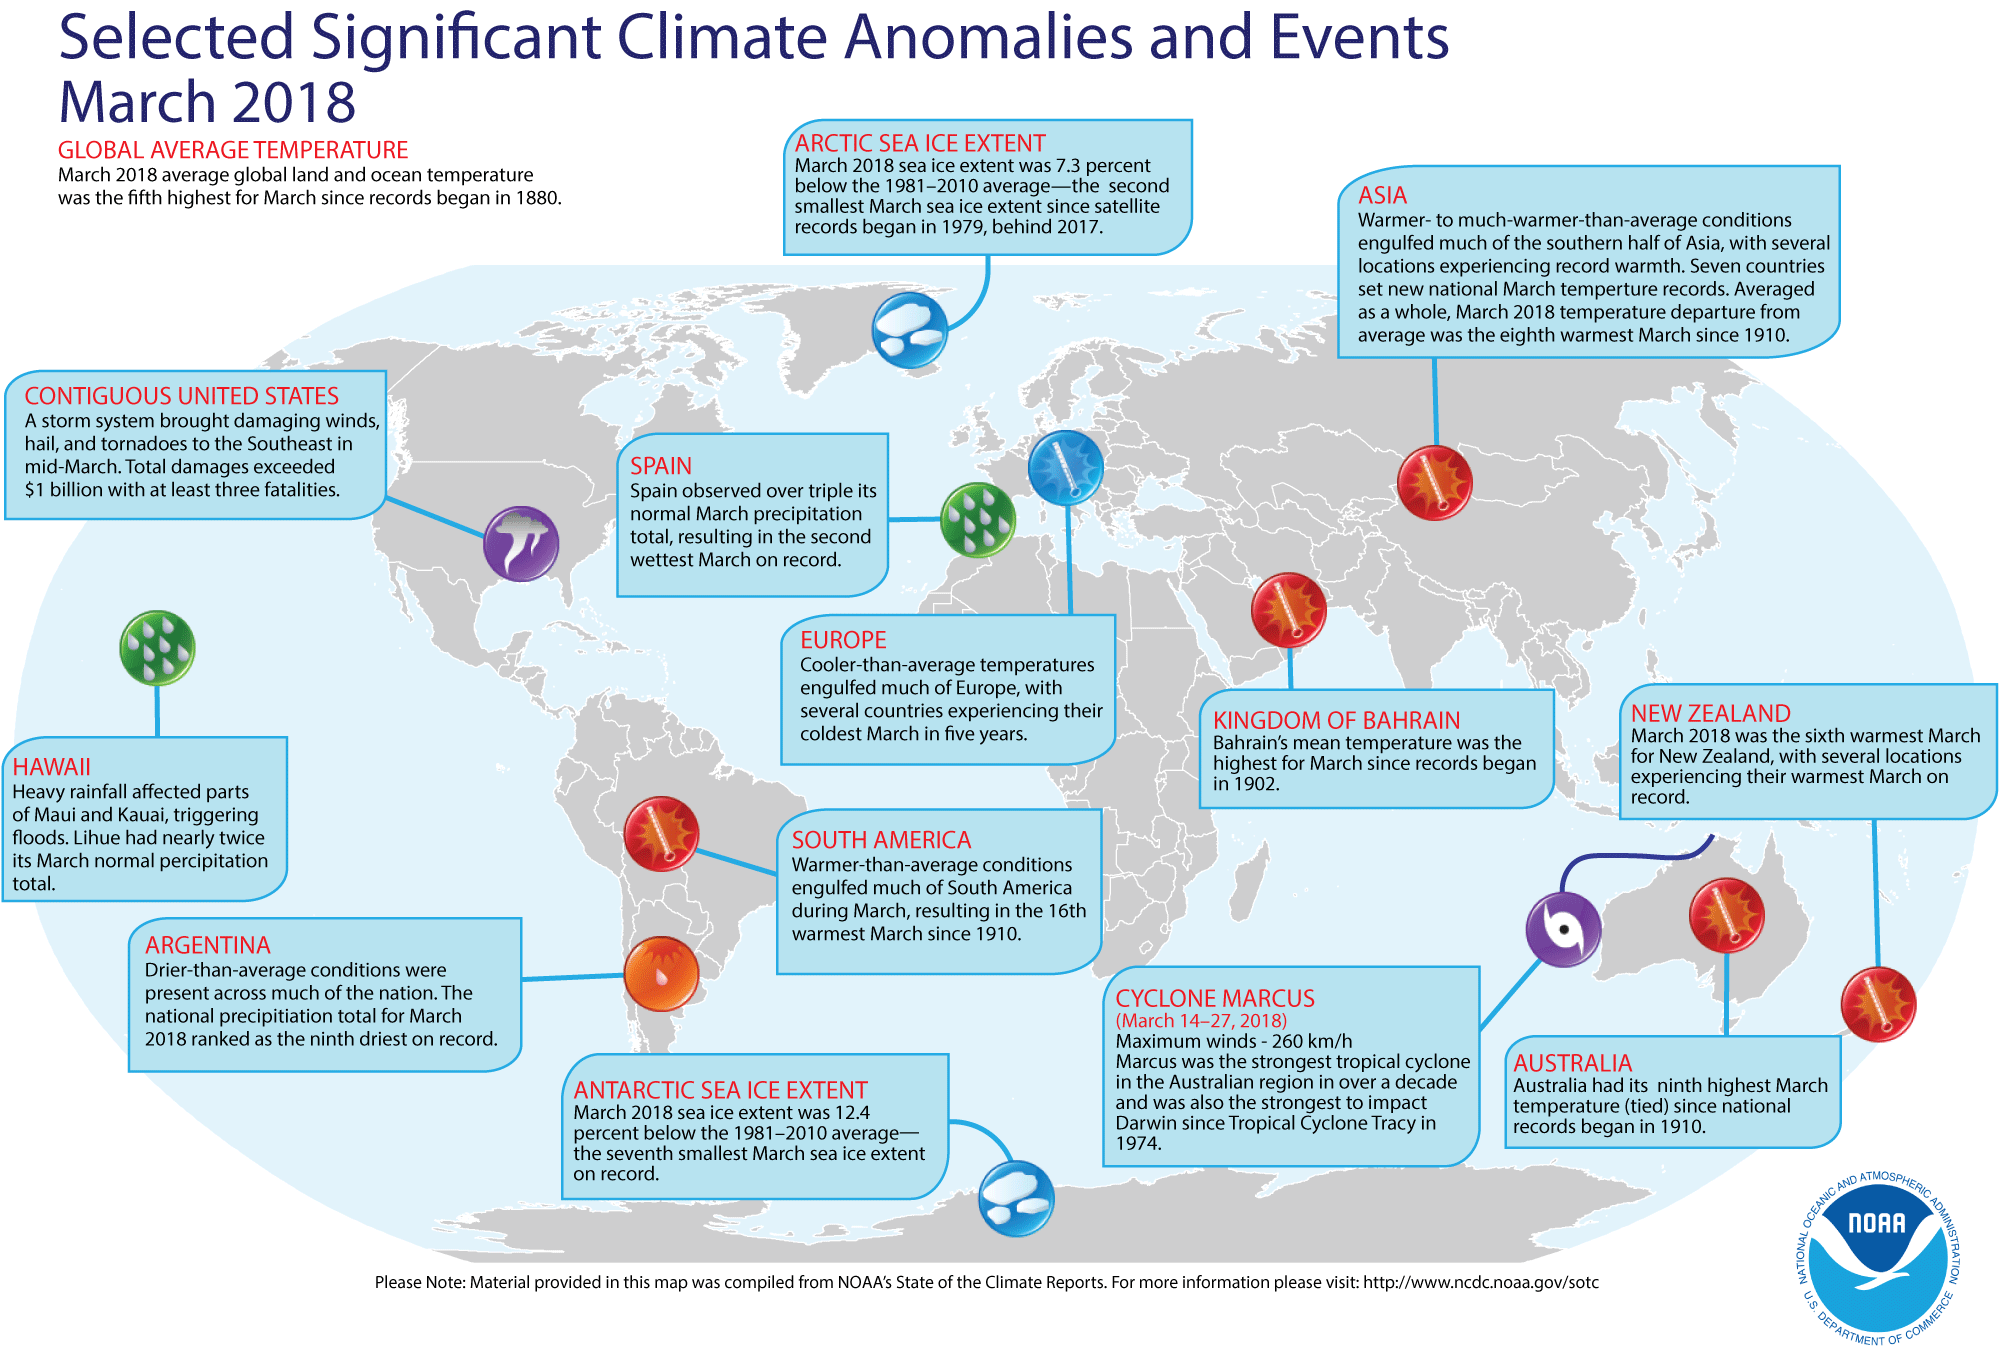 An annotated map of the world showing notable climate events that occurred during March 2018. For details, see bulleted list below in our story and also visit https://www.ncdc.noaa.gov/sotc/global/201803.